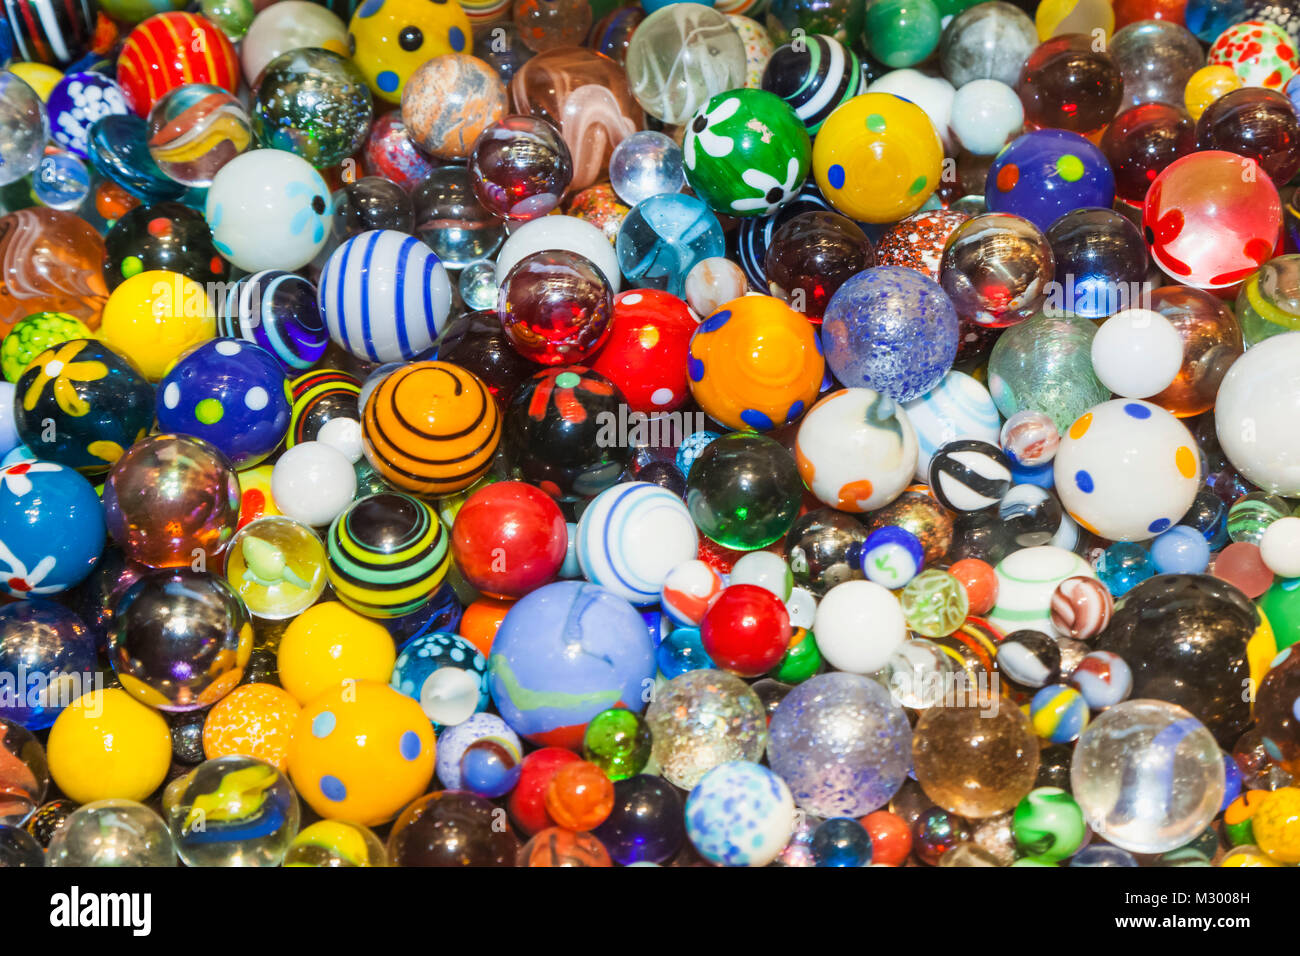 England, Devon, Bovey Tracey, House of Marbles and Teign Valley Glass, Marbles Stock Photo